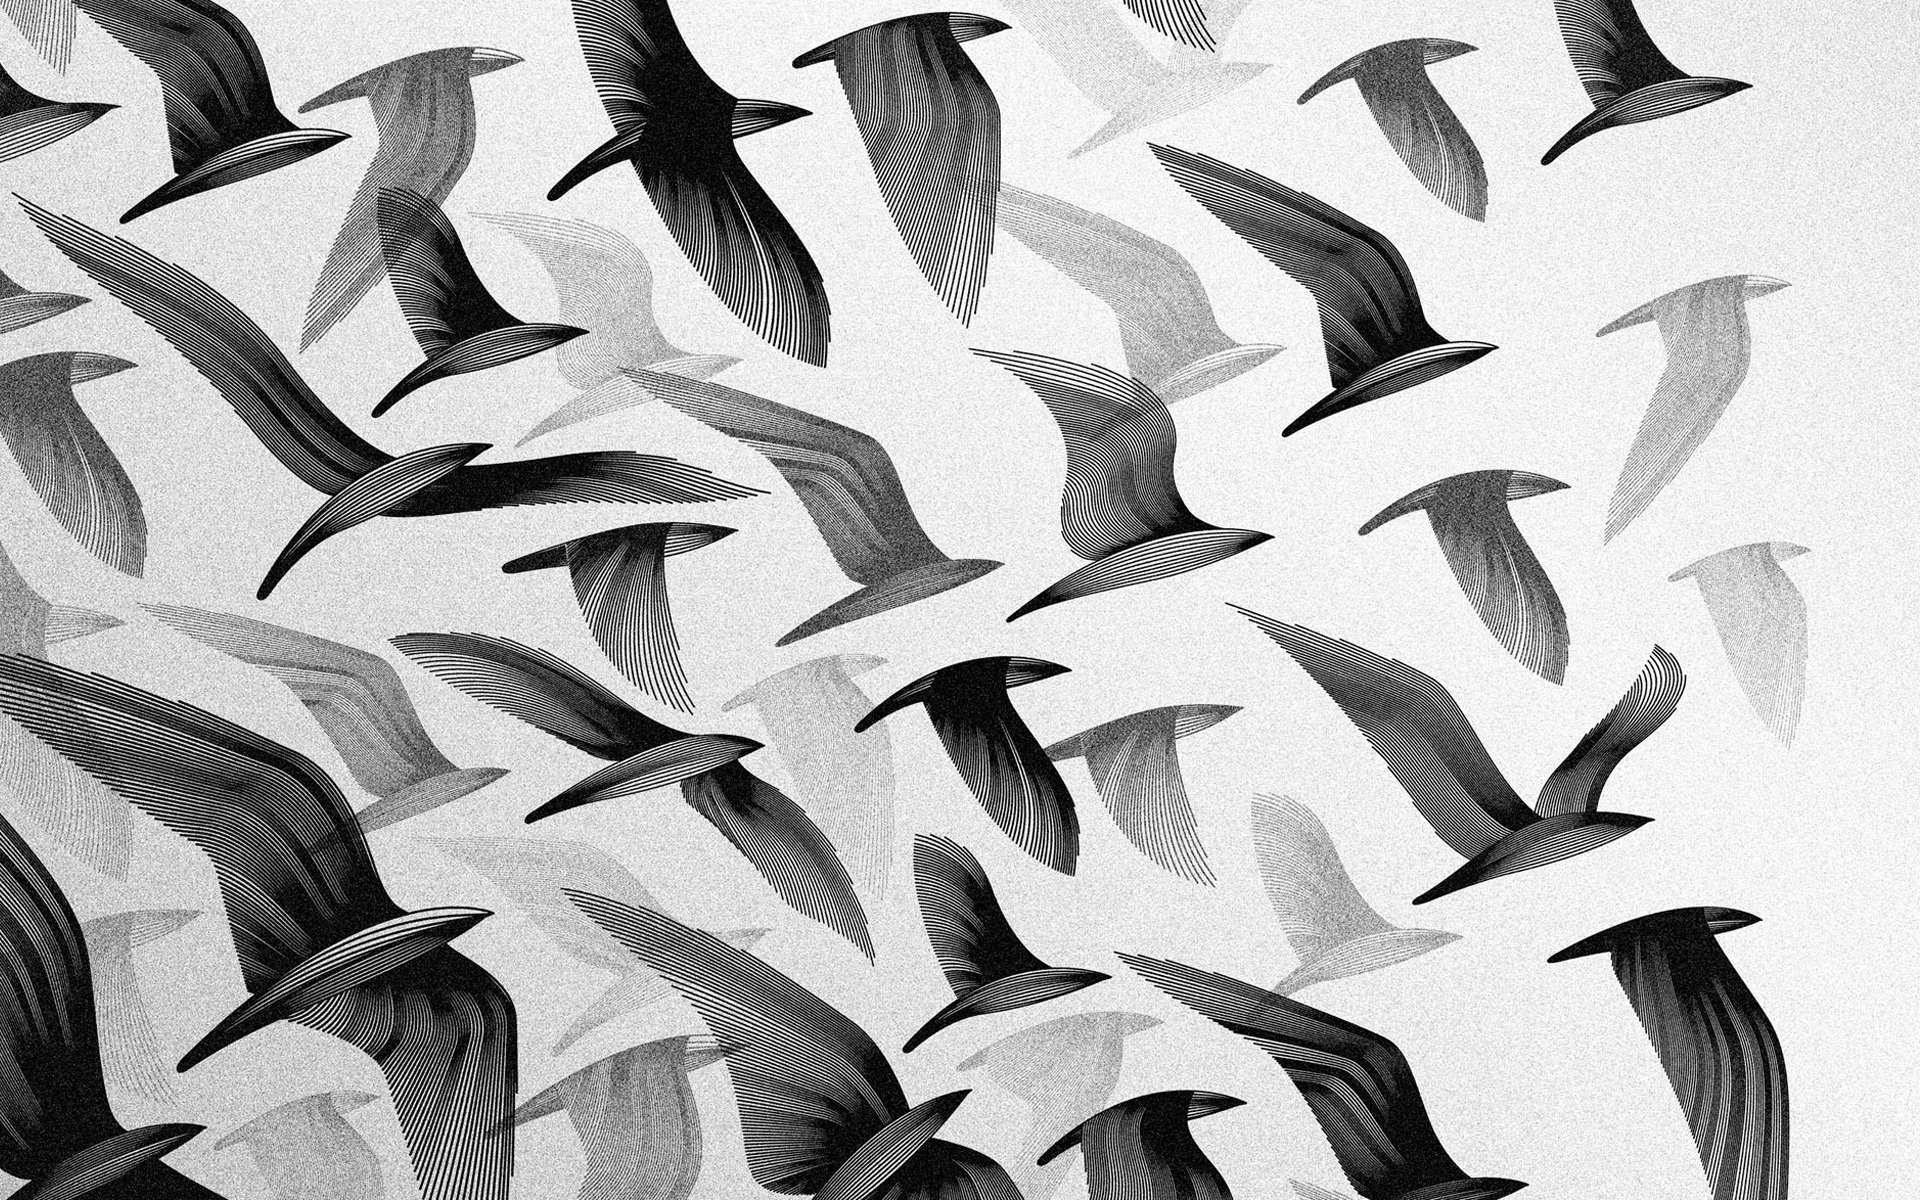 Black And White Birds Backgrounds Wallpaper with black birds